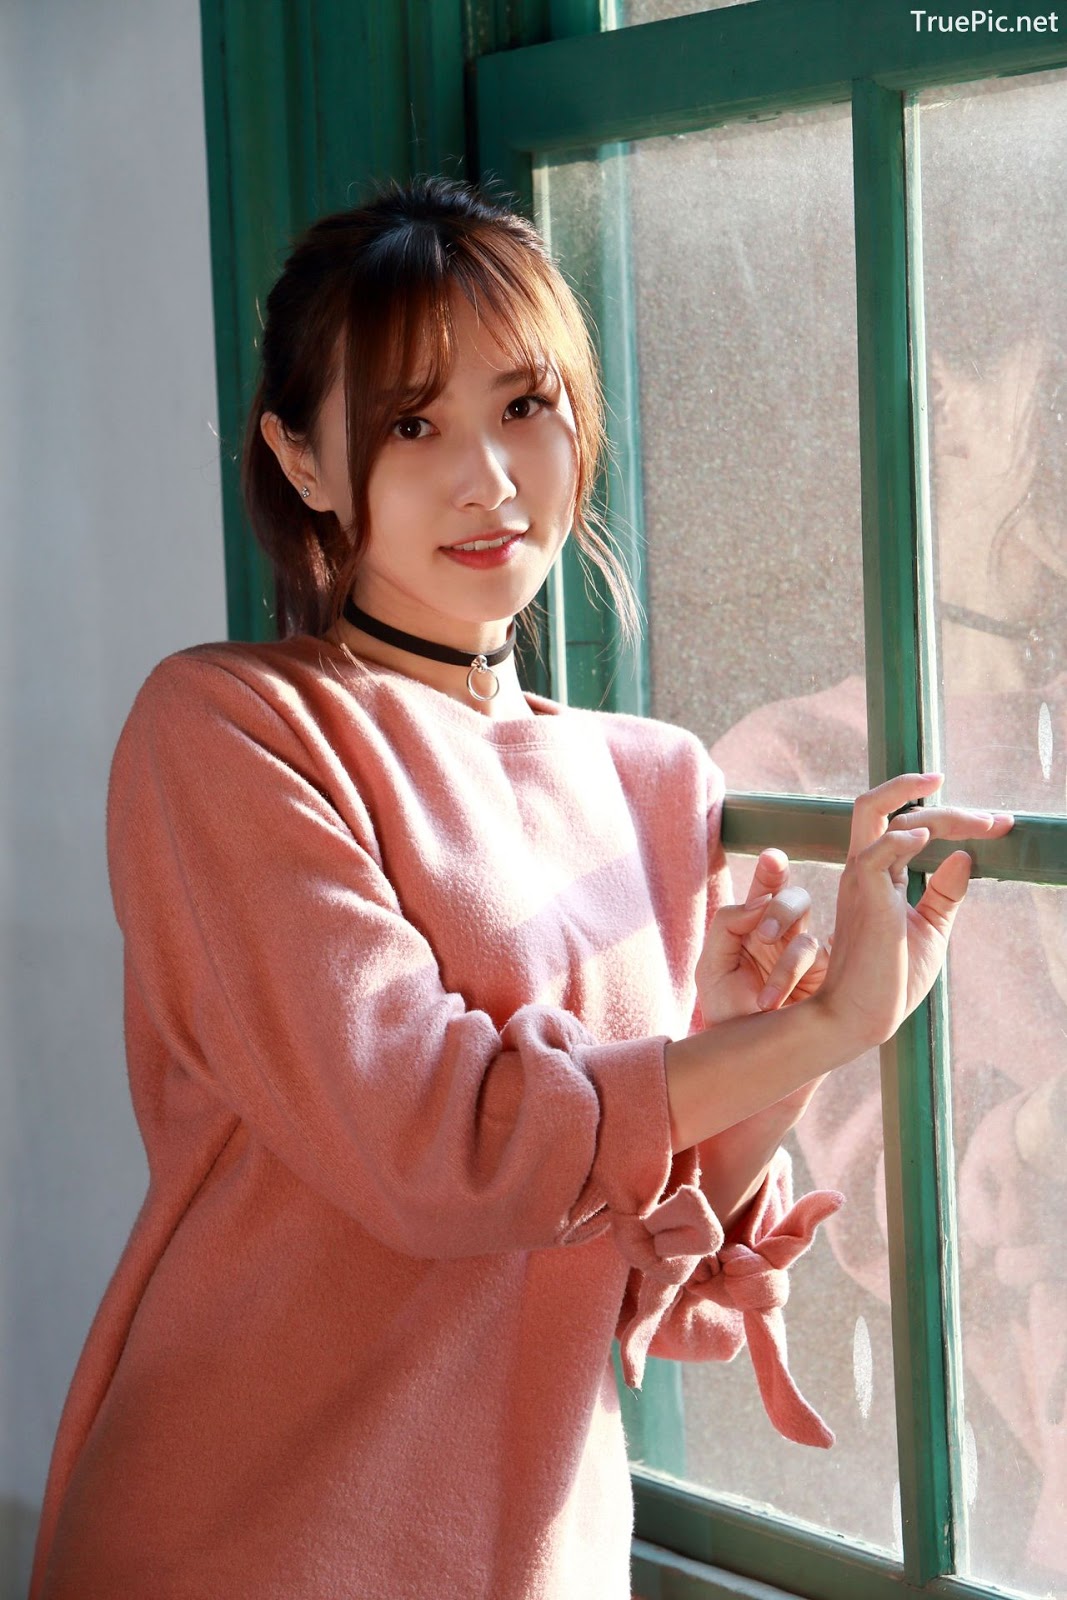 Image-Taiwanese-Model-郭思敏-Pure-And-Gorgeous-Girl-In-Pink-Sweater-Dress-TruePic.net- Picture-68